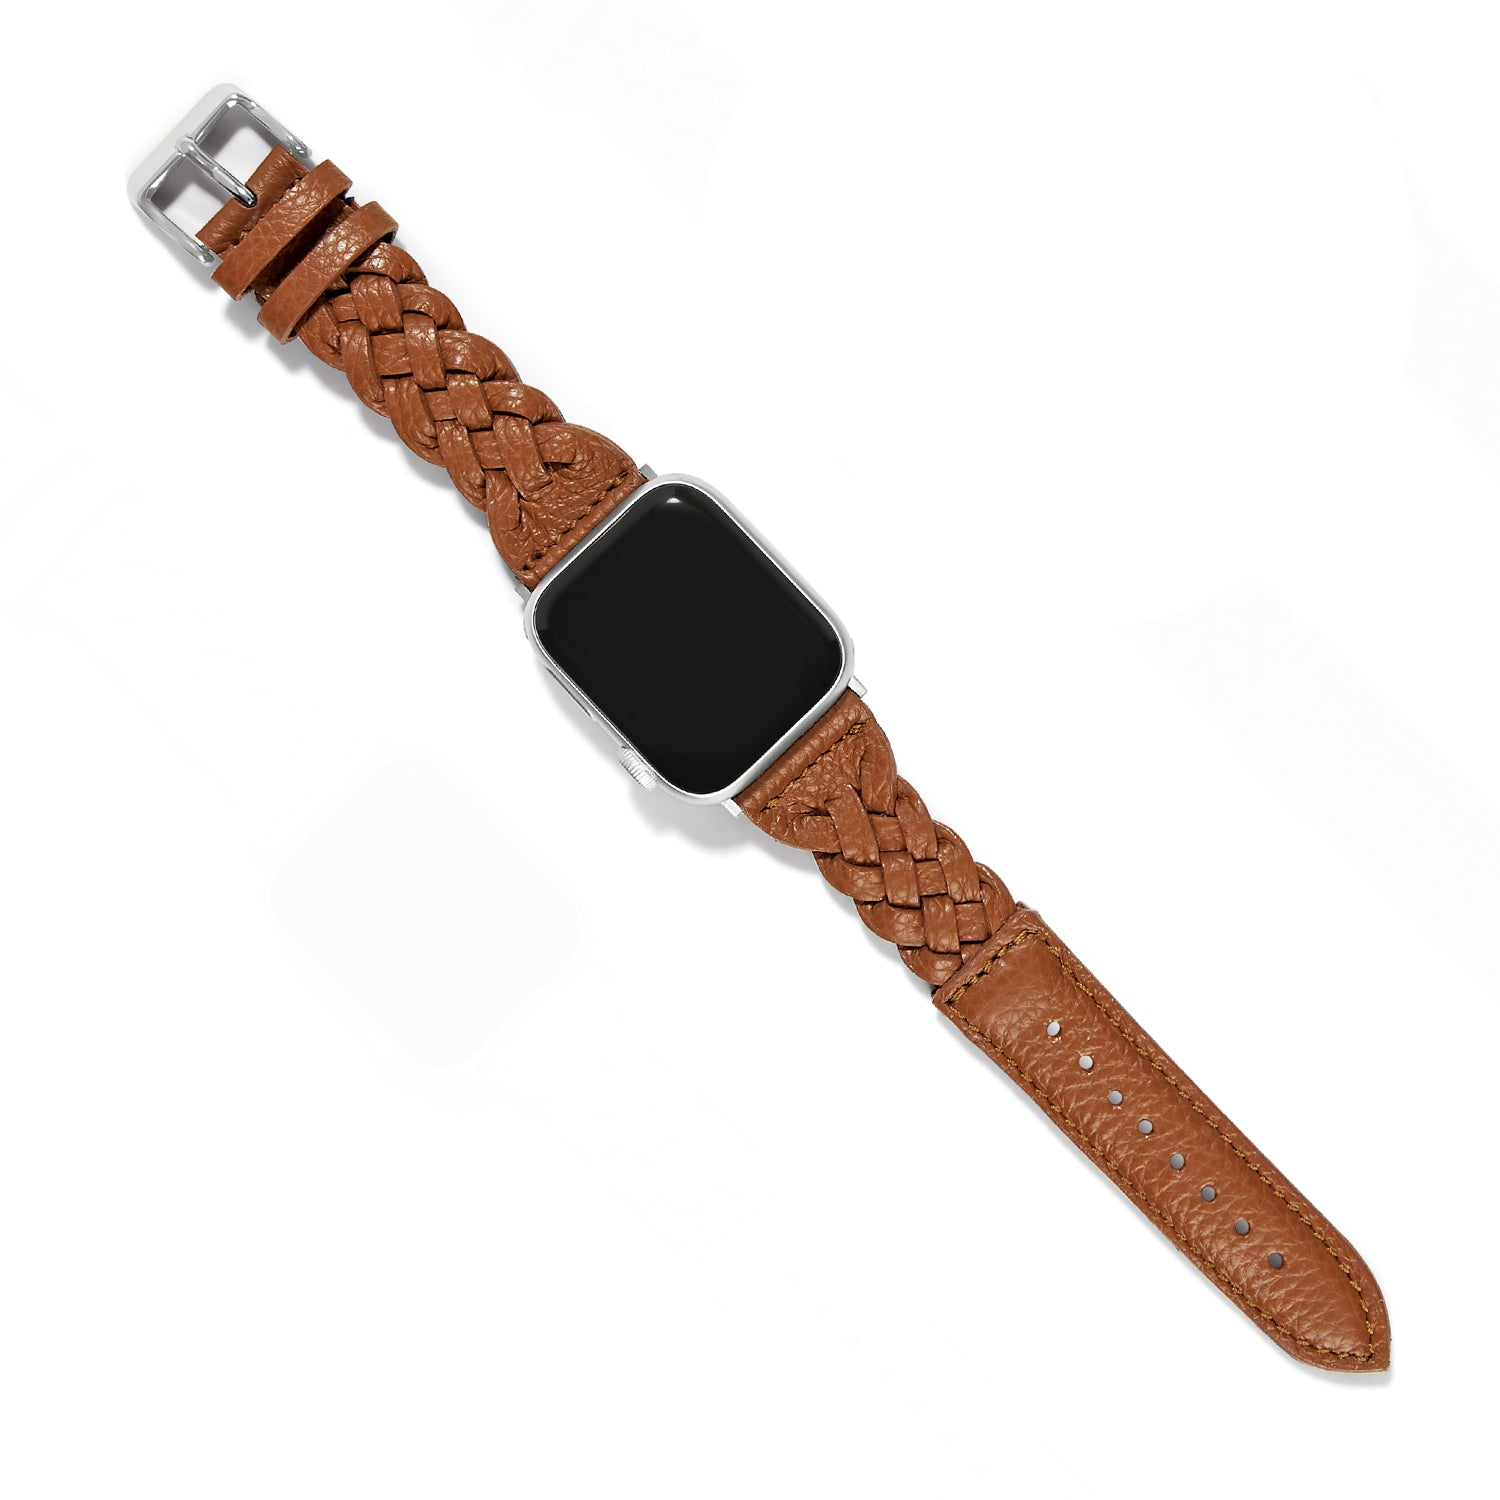 A brown leather Apple Watch band, designed by Brighton.